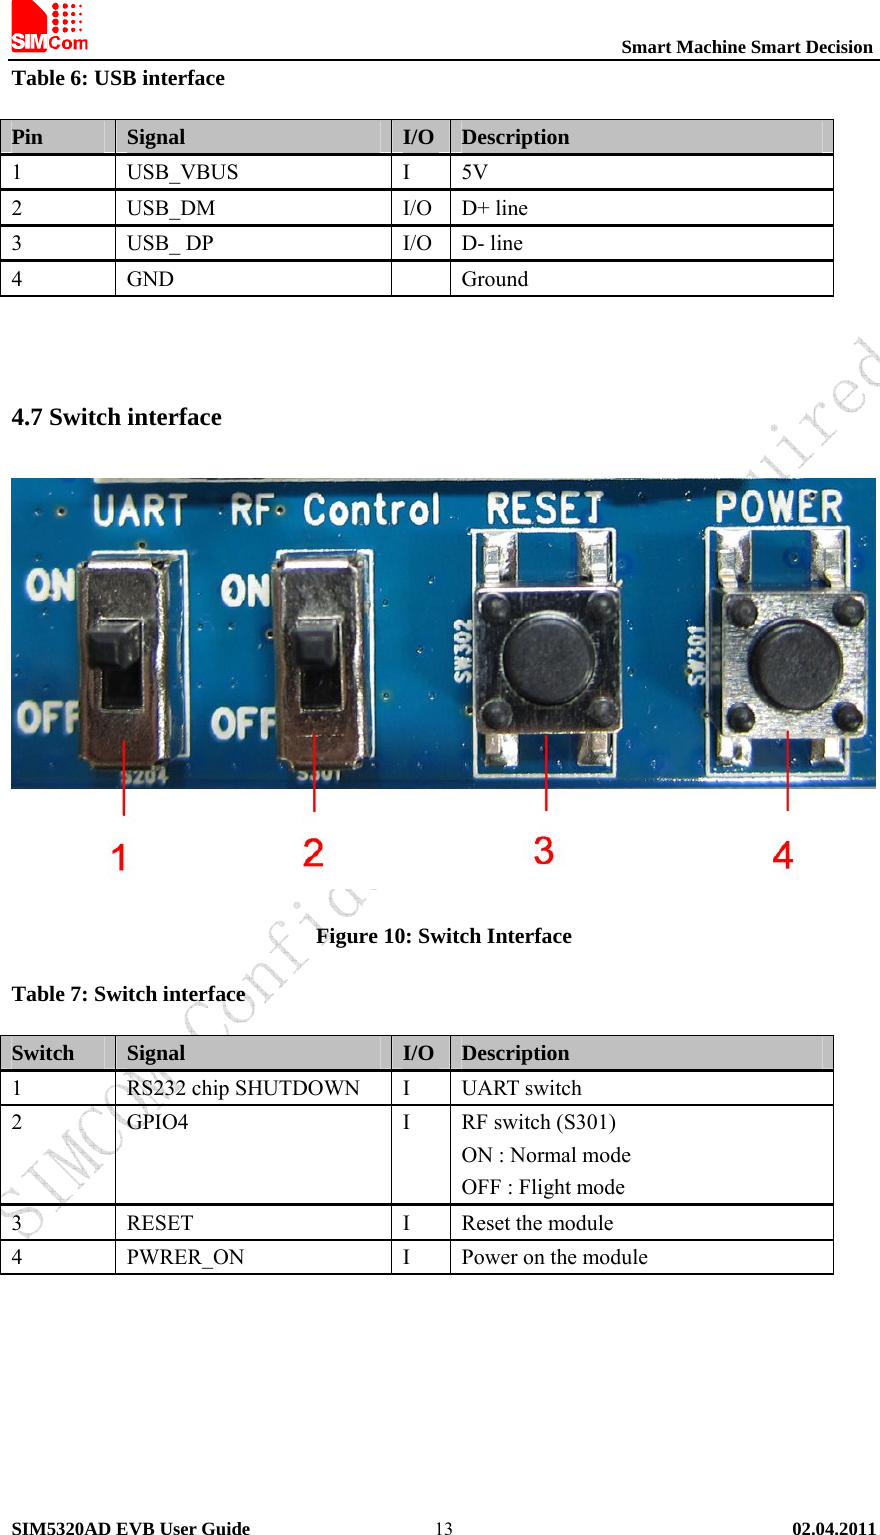                                                          Smart Machine Smart Decision SIM5320AD EVB User Guide   02.04.2011   13Table 6: USB interface Pin  Signal  I/O Description 1 USB_VBUS  I 5V 2 USB_DM  I/O D+ line 3 USB_ DP  I/O D- line 4 GND   Ground   4.7 Switch interface  Figure 10: Switch Interface Table 7: Switch interface Switch  Signal  I/O Description 1  RS232 chip SHUTDOWN  I UART switch 2 GPIO4  I RF switch (S301) ON : Normal mode OFF : Flight mode 3 RESET  I Reset the module   4 PWRER_ON   I Power on the module  